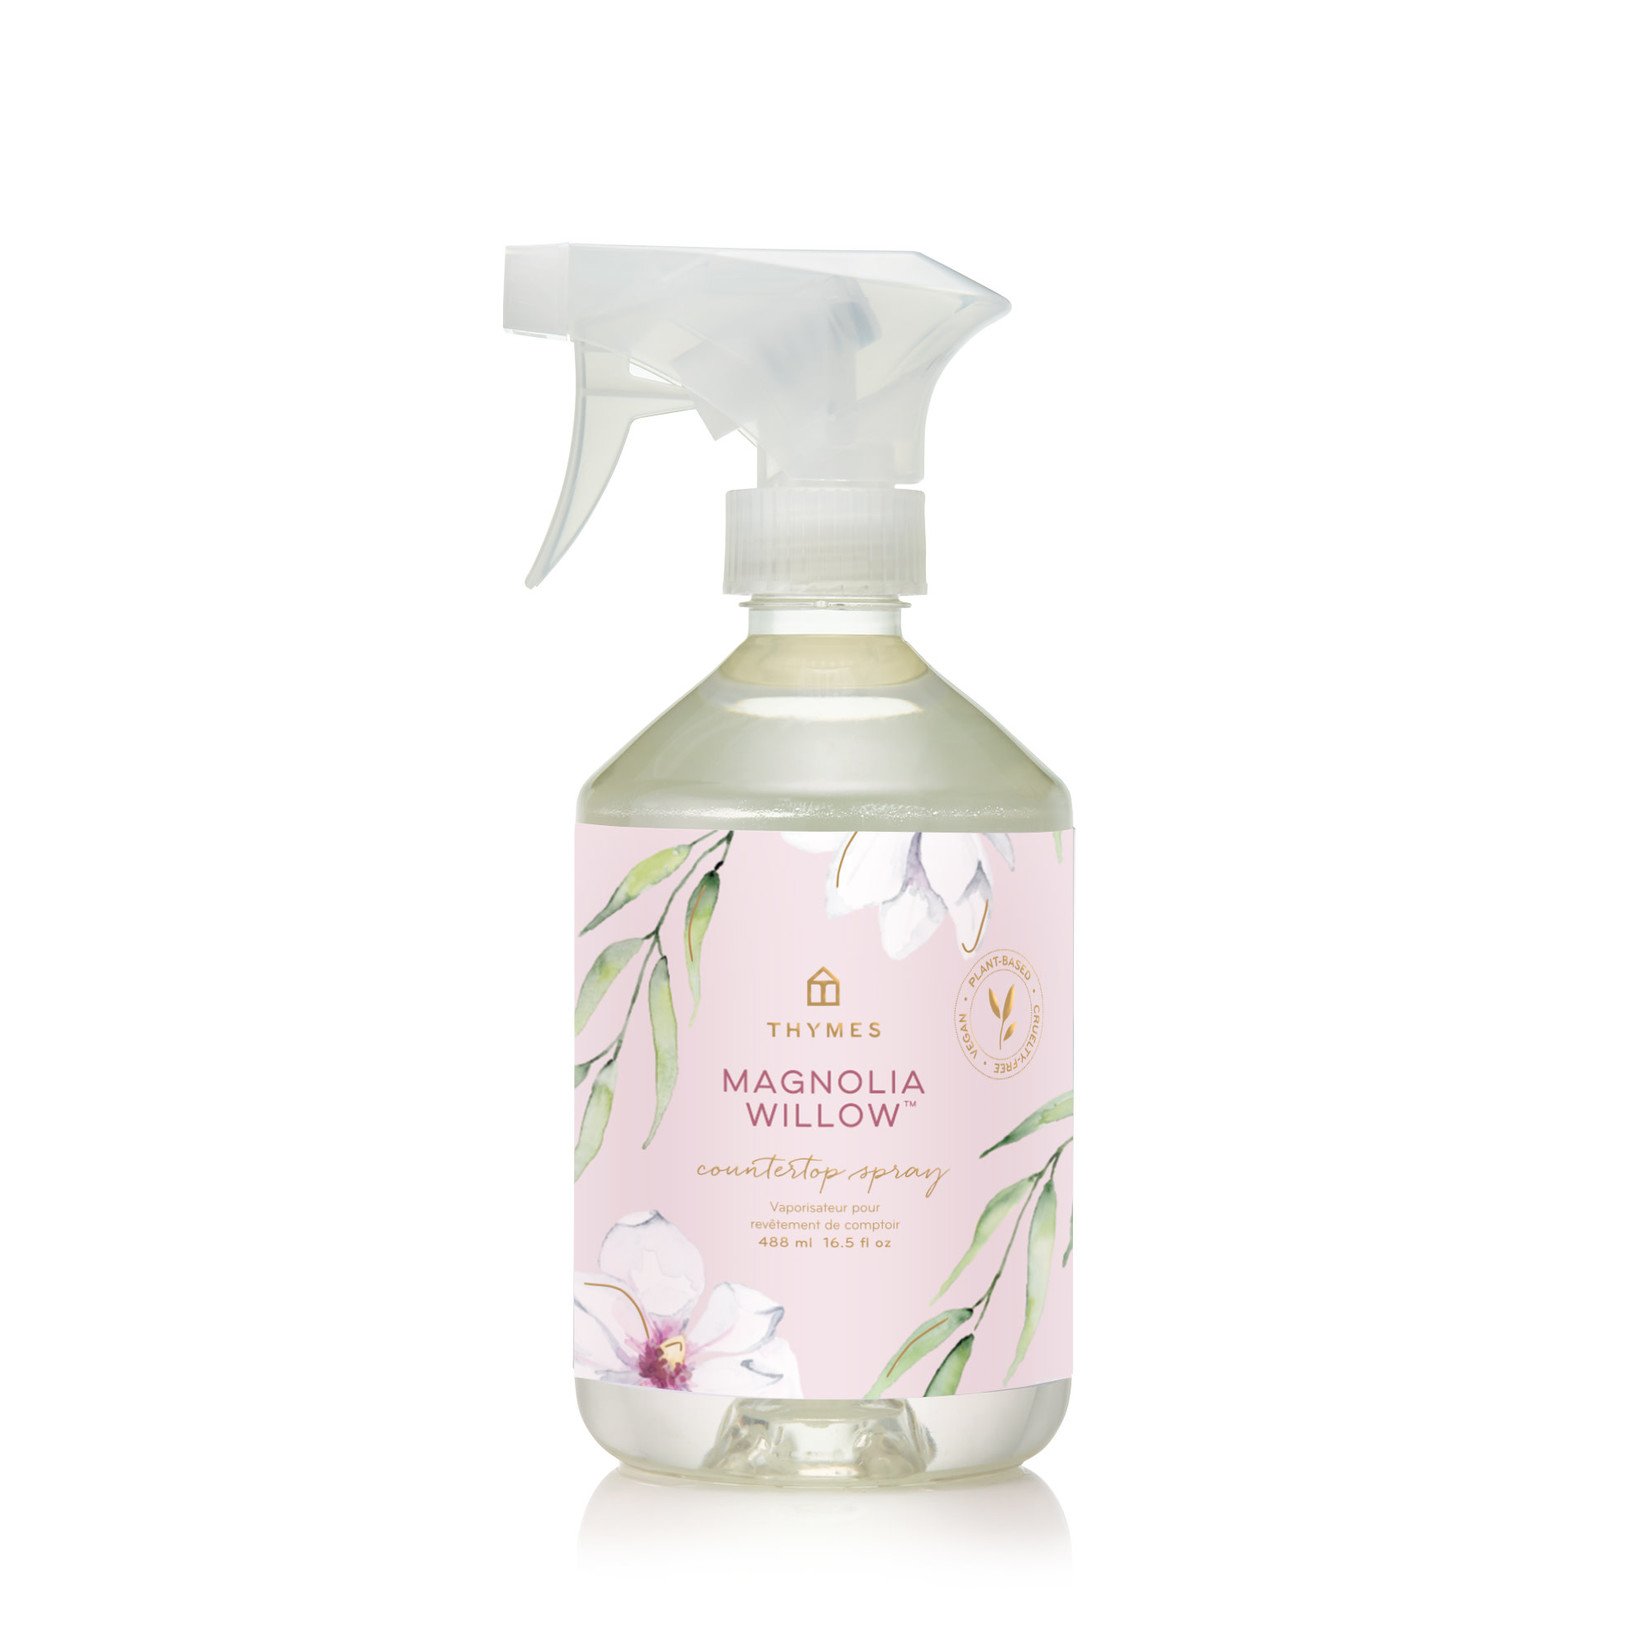 Thymes Thymes Countertop Spray